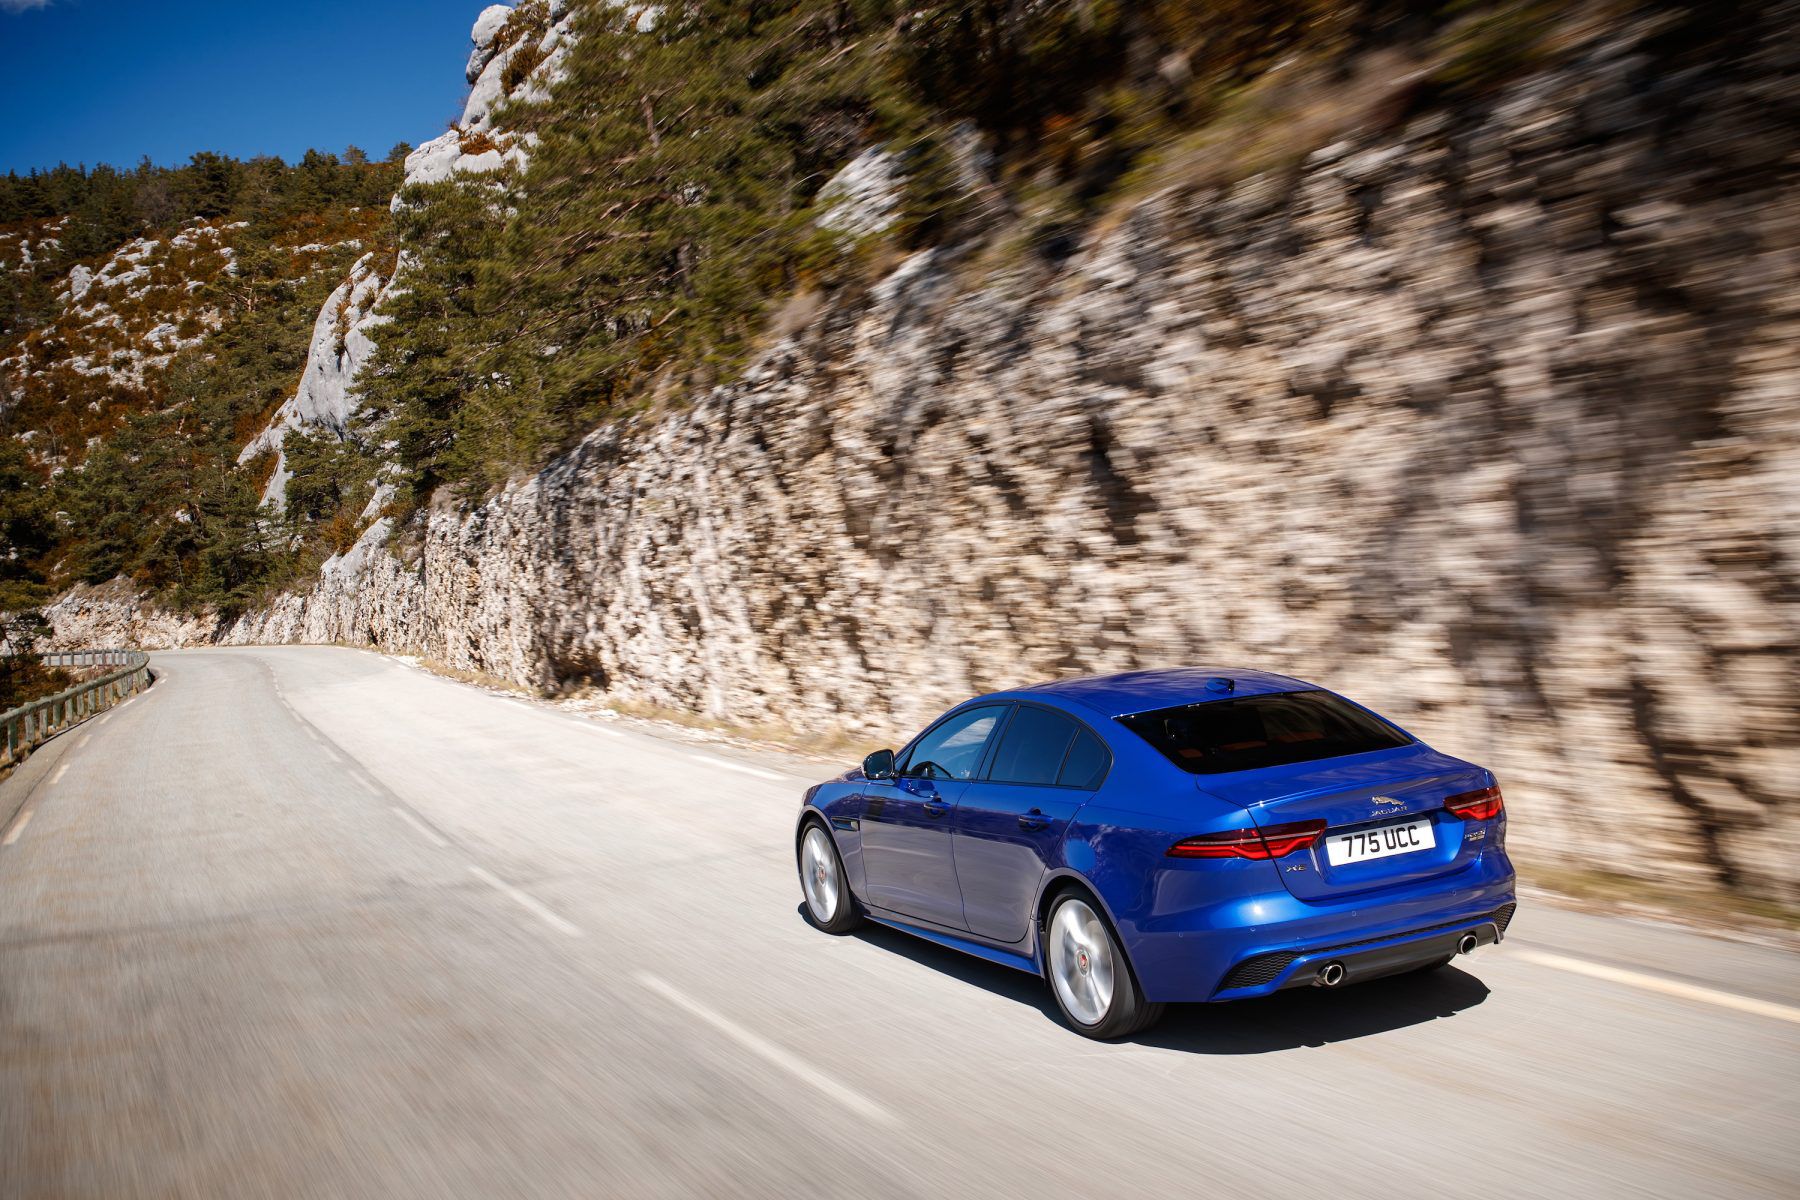 Jaguar XE driving by the side of a rocky mountain